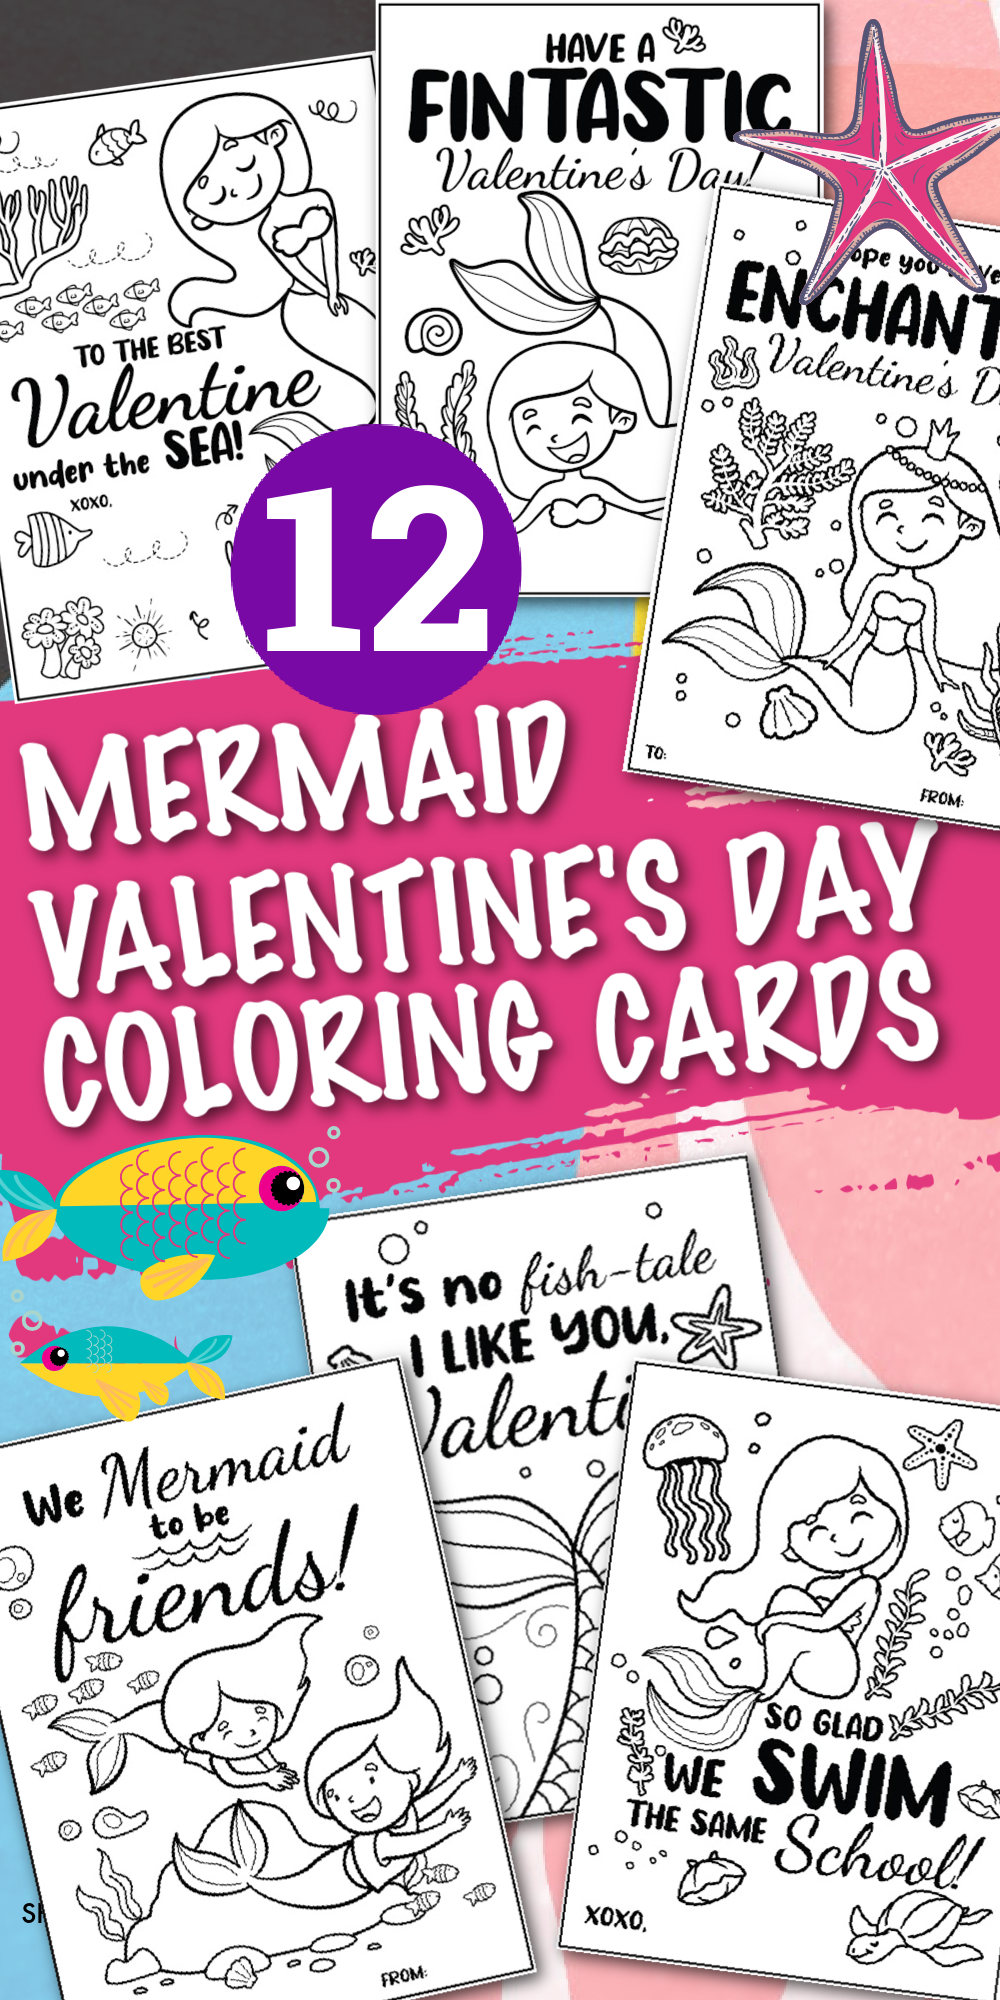 A collage of printable mermaid coloring Valentine's Day cards for kids. Fun Valentine sayings and cute mermaid drawings to color.